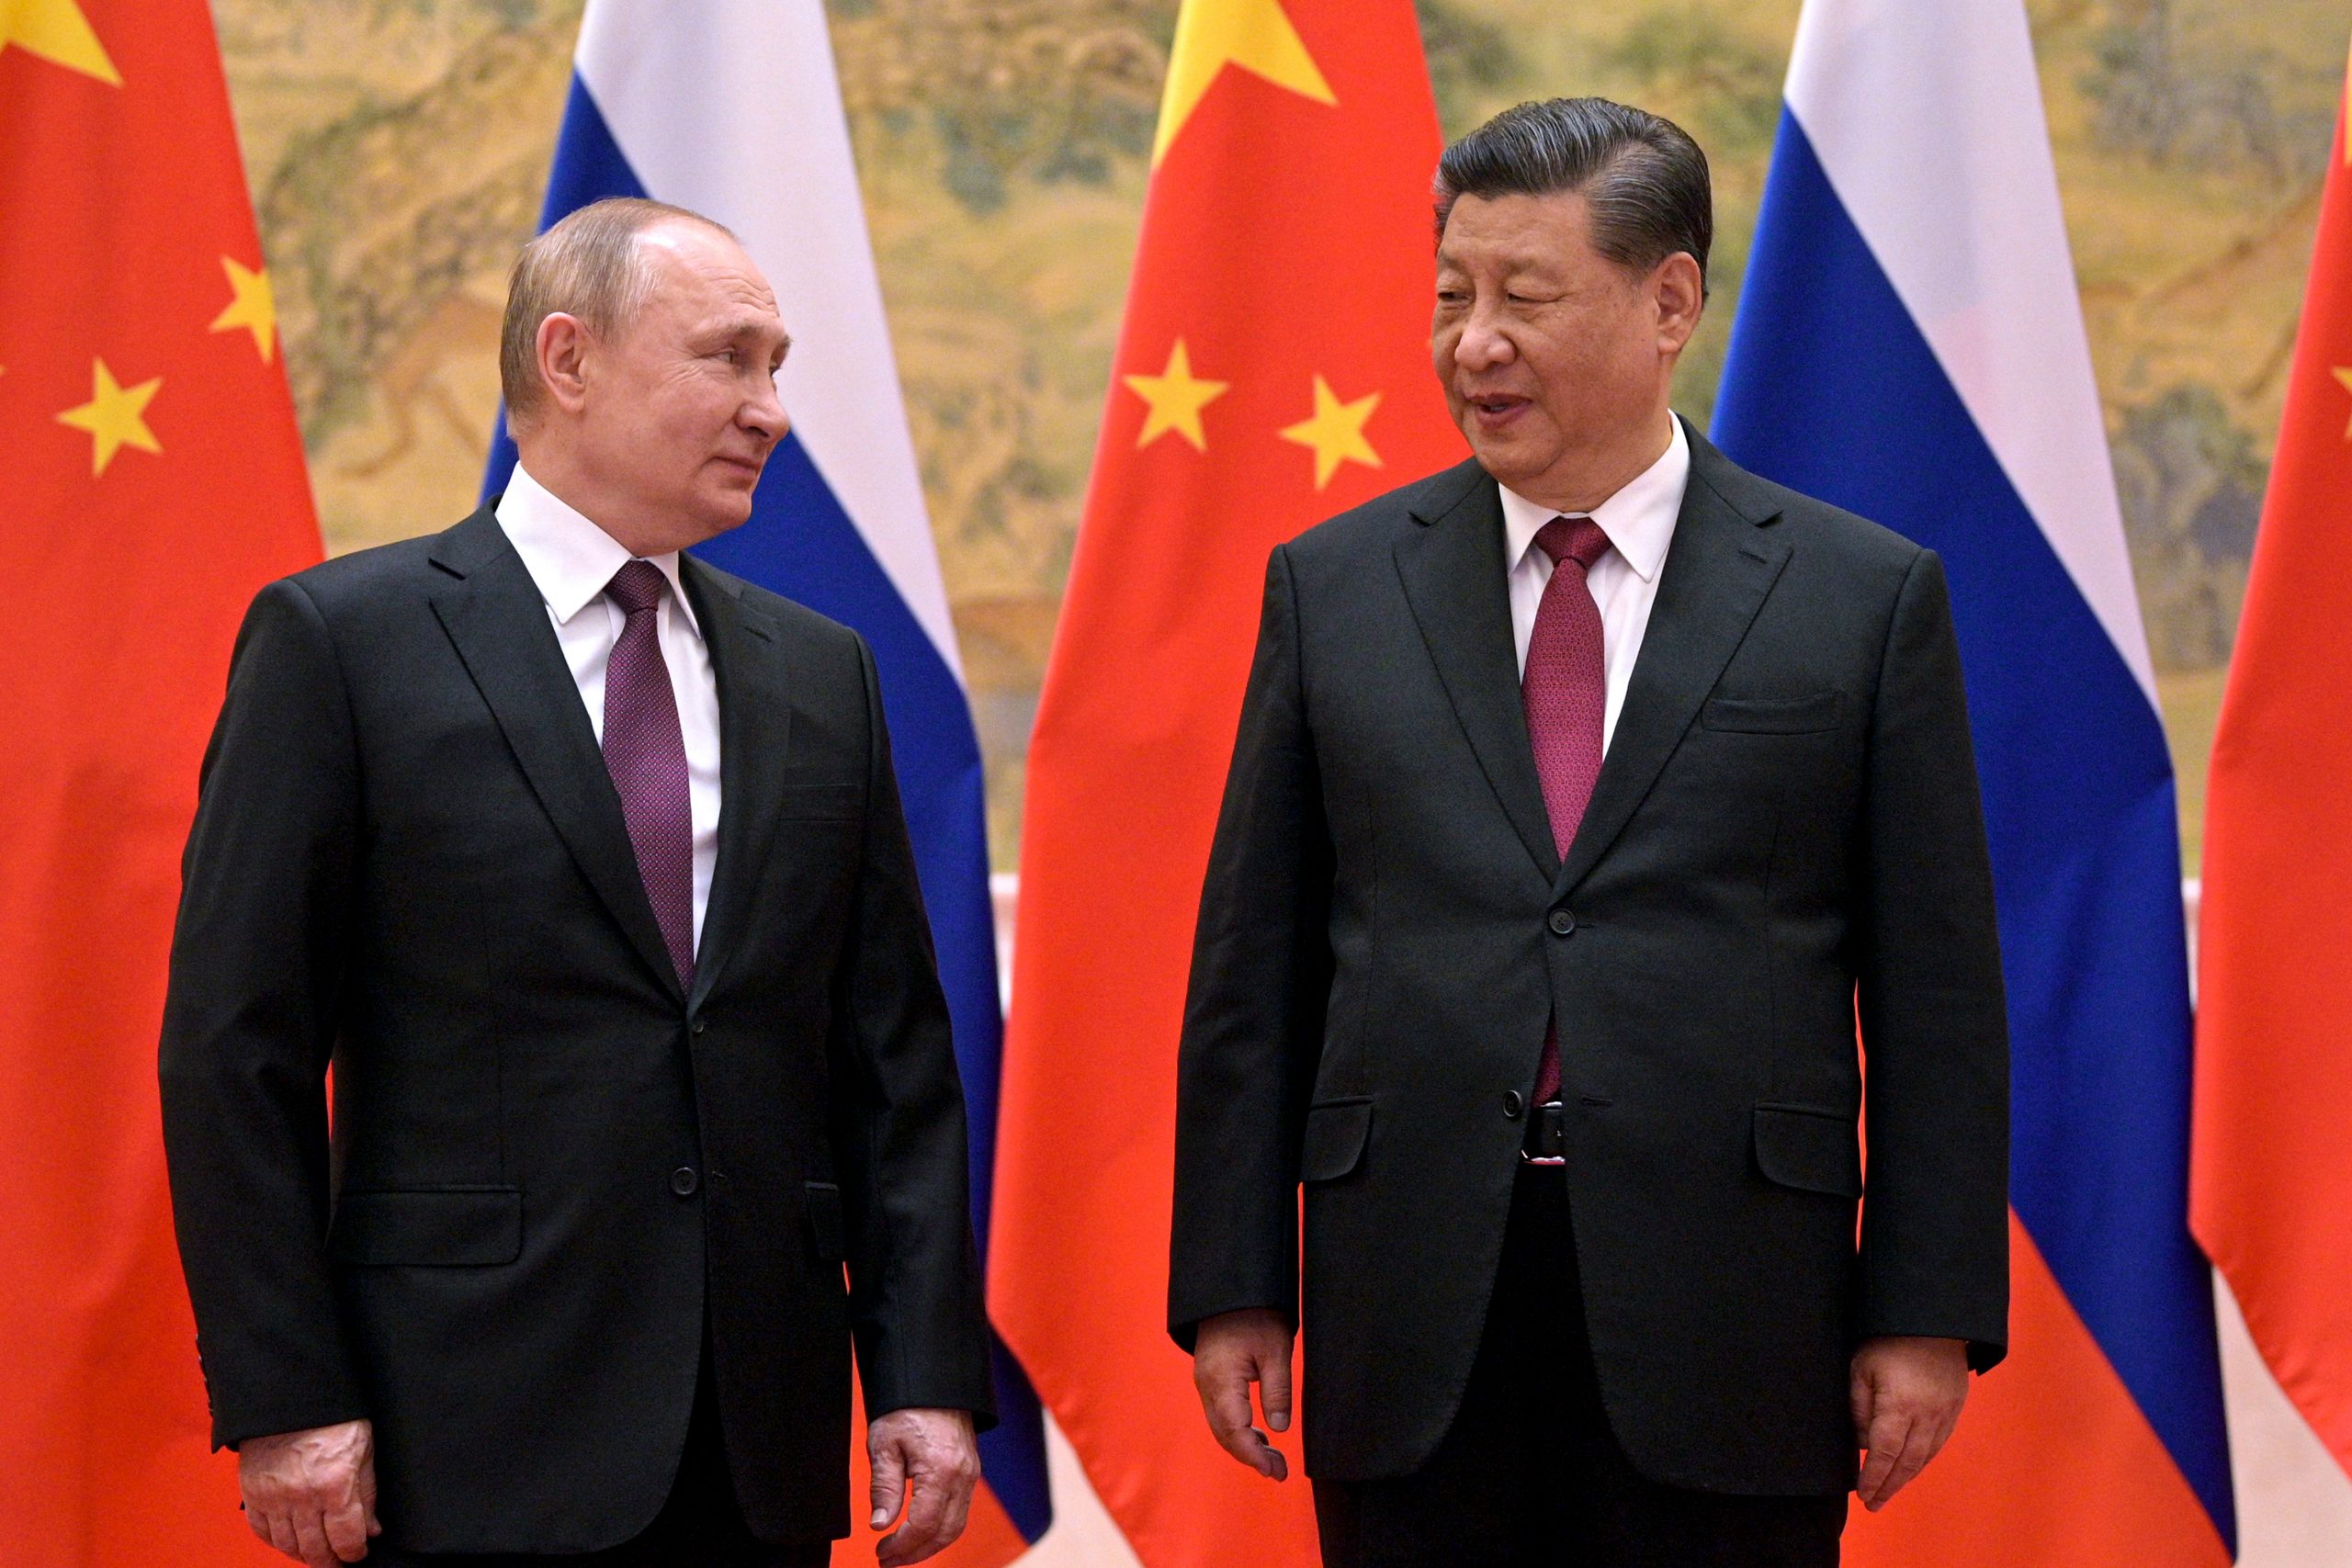 China likely to be Russia’s best hope to blunt sanctions, but wary: Report